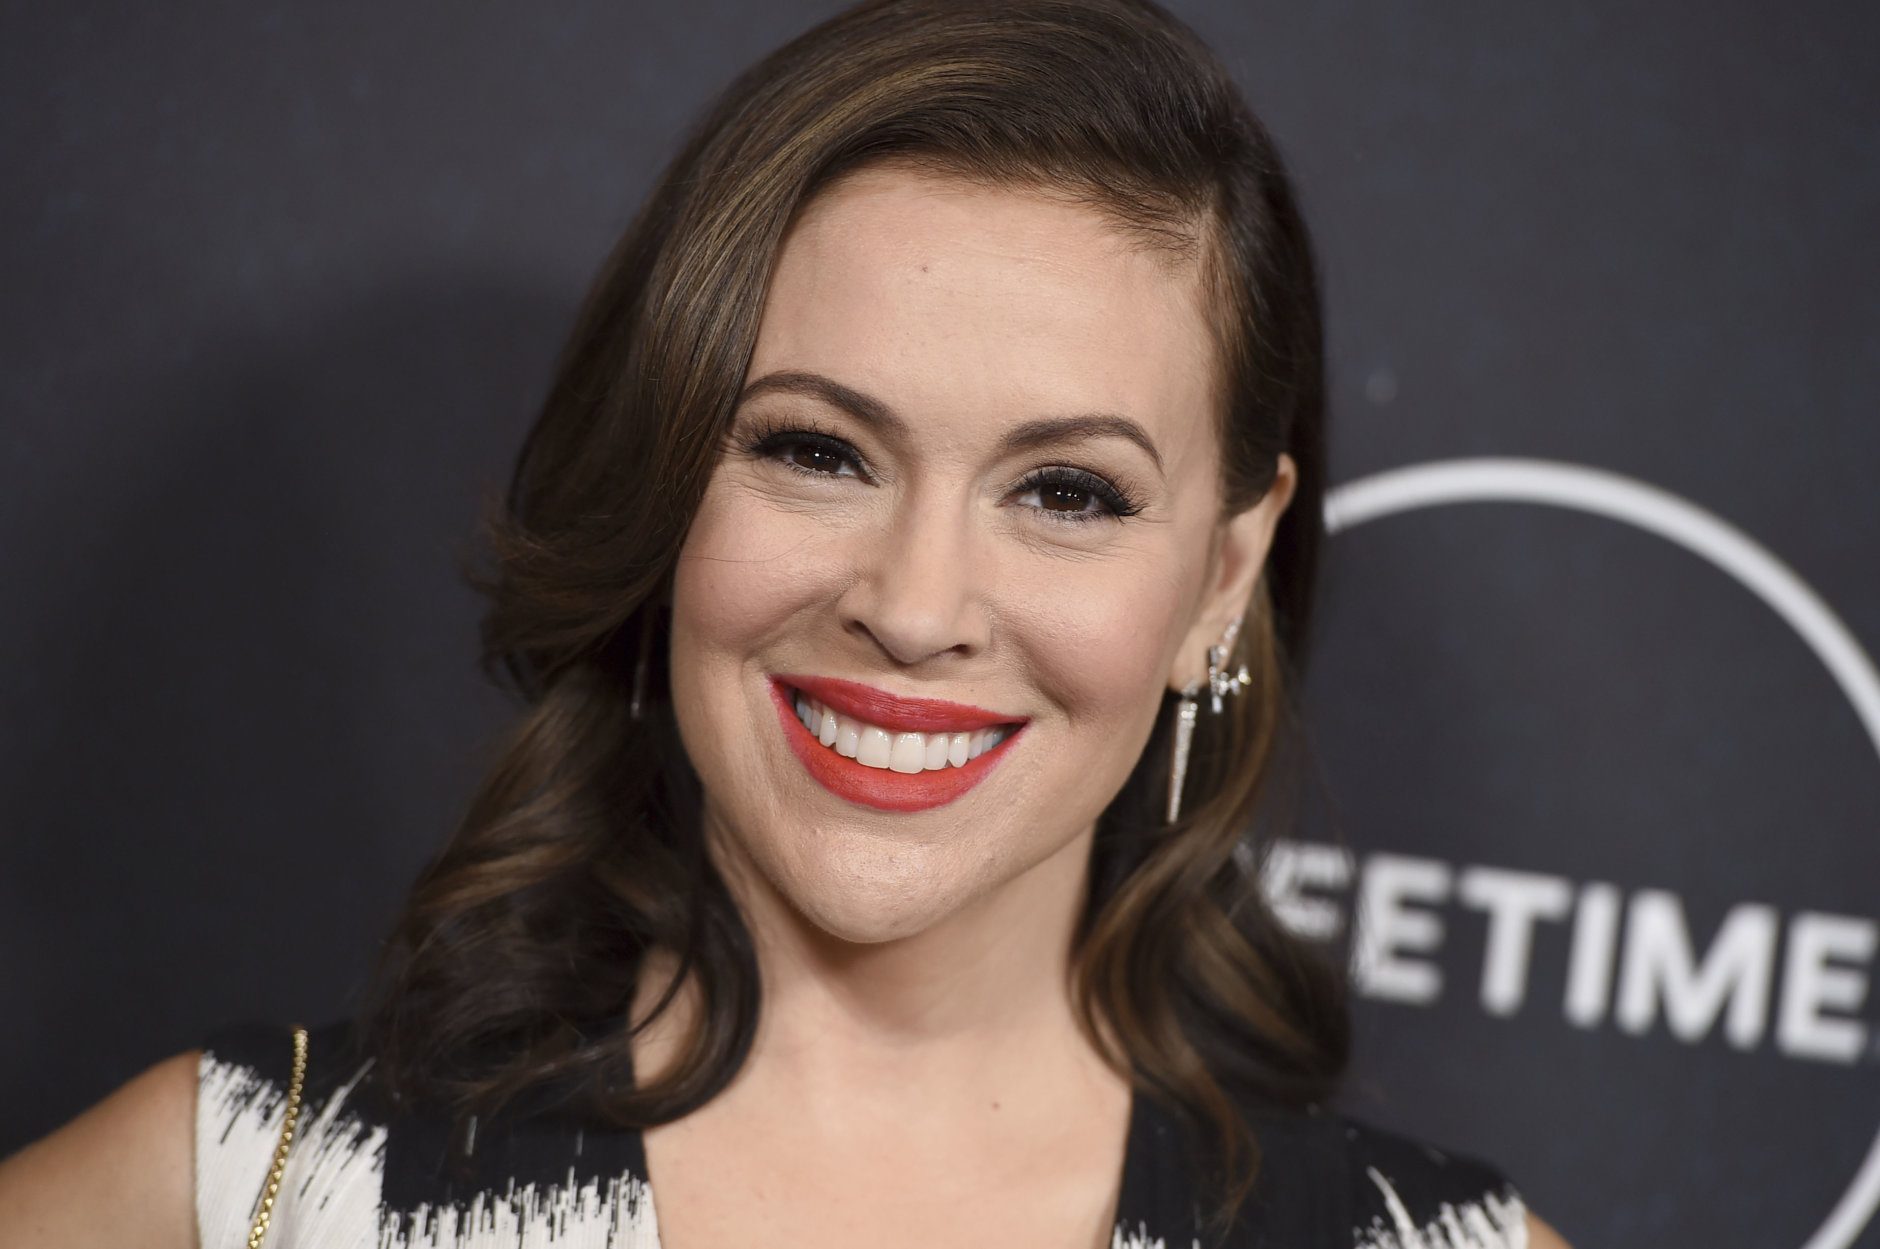 FILE - In this Oct. 12, 2018, file photo, Alyssa Milano arrives at Variety's Power of Women event at the Beverly Wilshire hotel in Beverly Hills, Calif. On Oct. 15, 2017, Milano urged the Twittersphere to join her in sharing a personal story of sexual harassment in the wake of rape allegations against Harvey Weinstein. The response was immediate and overwhelming, and touched off a cultural movement that has shed light on the pervasiveness of sexual harassment, assault and violence against women across all industries, building on work started over a decade earlier by activist Tarana Burke. (Photo by Jordan Strauss/Invision/AP, File)